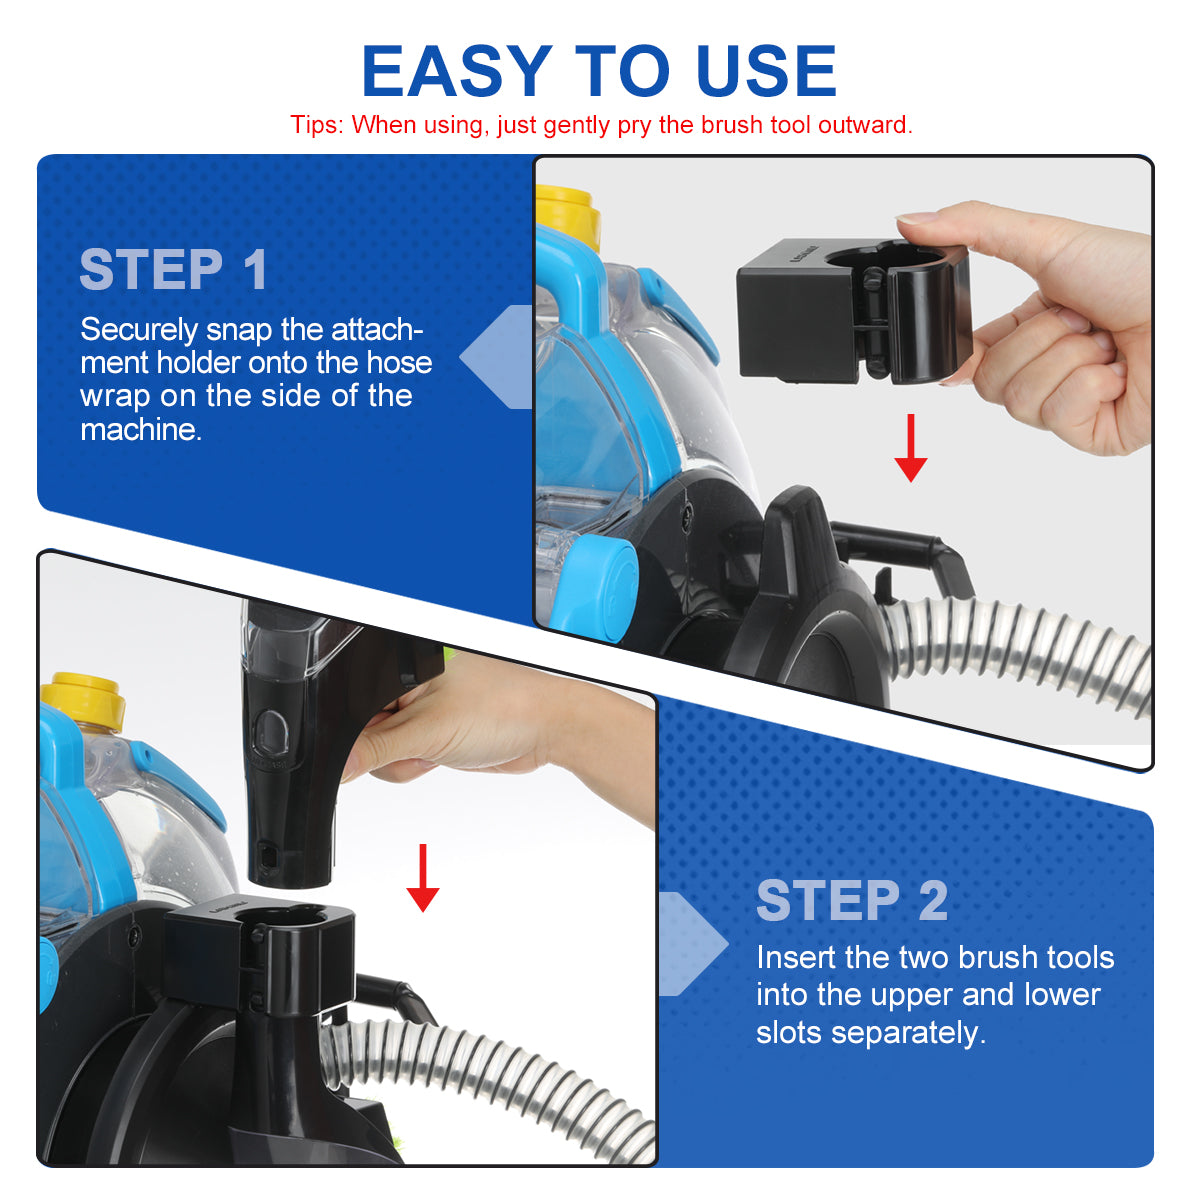 how to install LANMU Attachments Holder Compatible: securely snap the attach-ment holder onto the hose wrap on the side of the machine, insert the two brush tools into the upper and lower slots separately